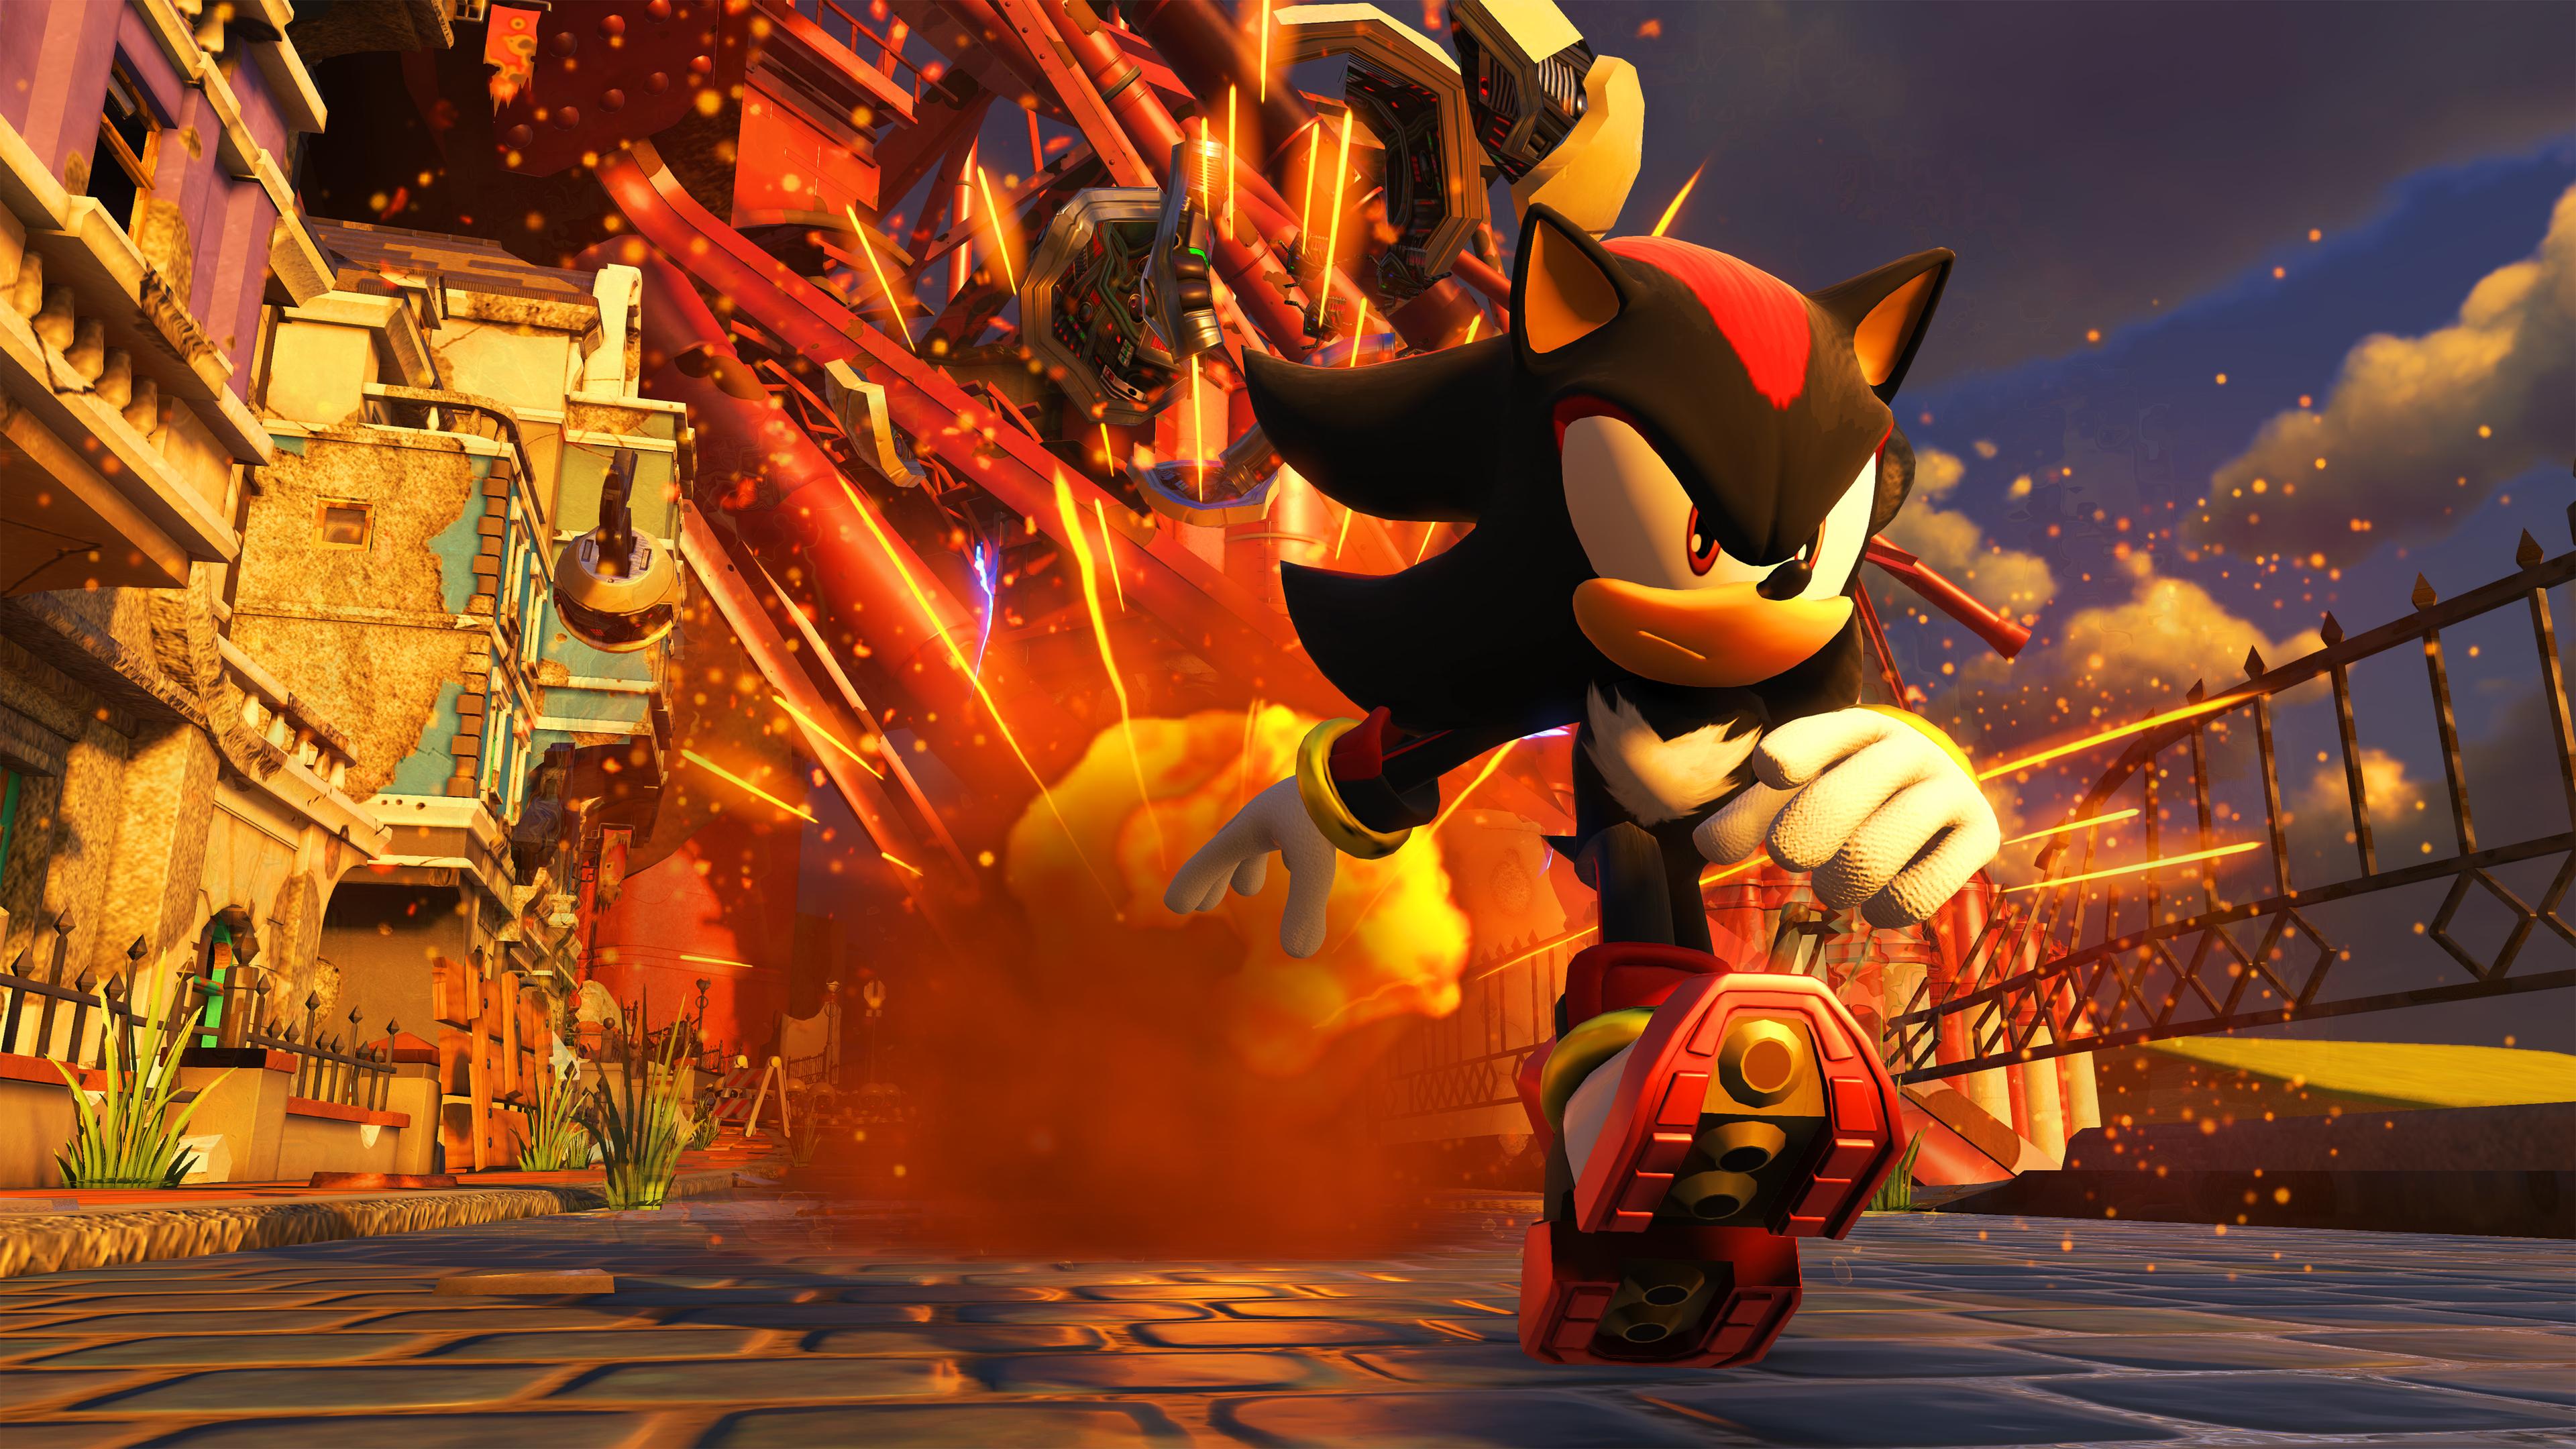 Video Game Sonic Forces HD Wallpaper | Background Image